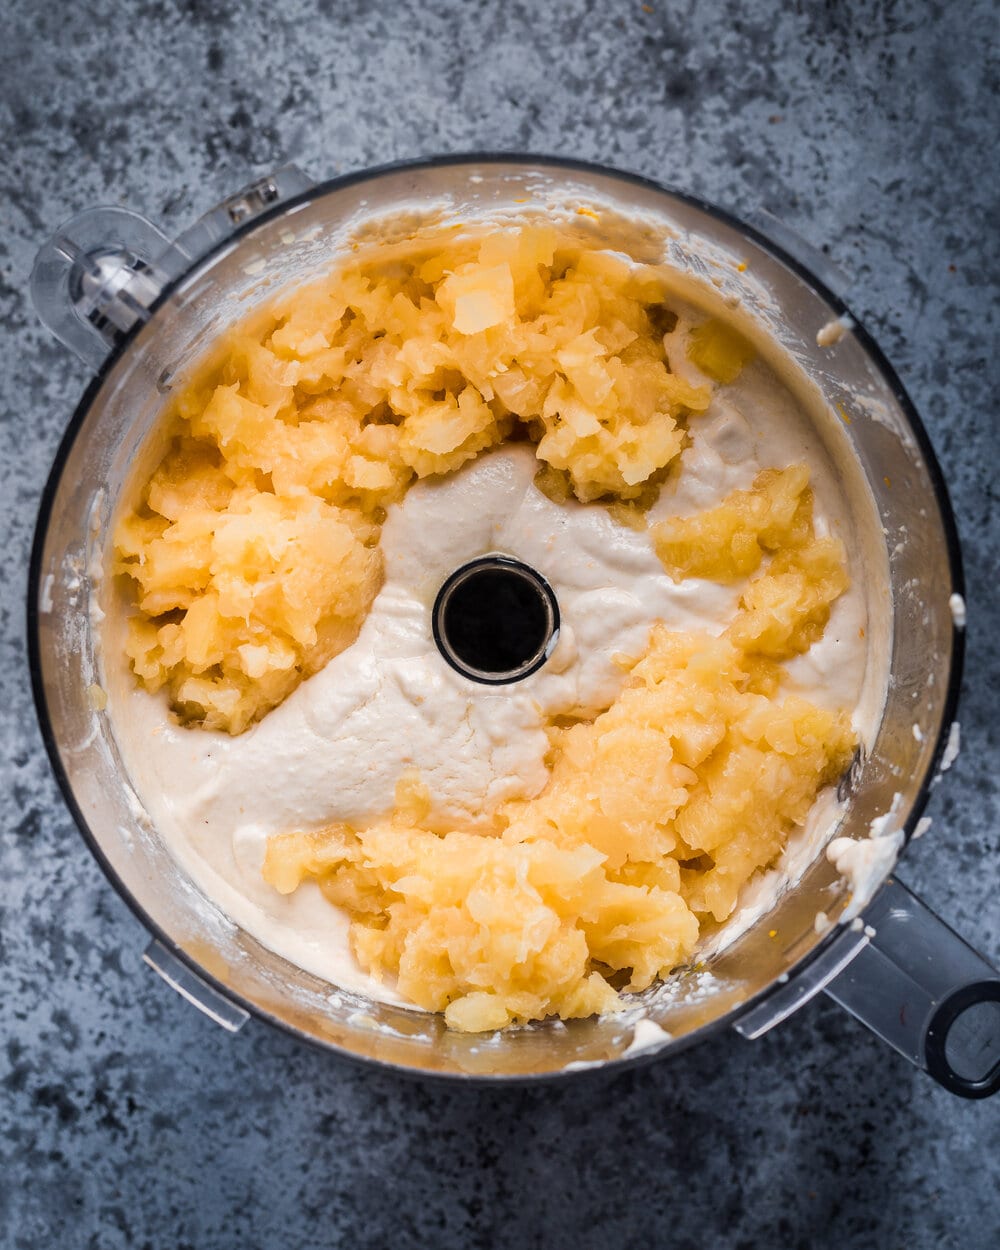 crushed pineapple being added to batter in food processor